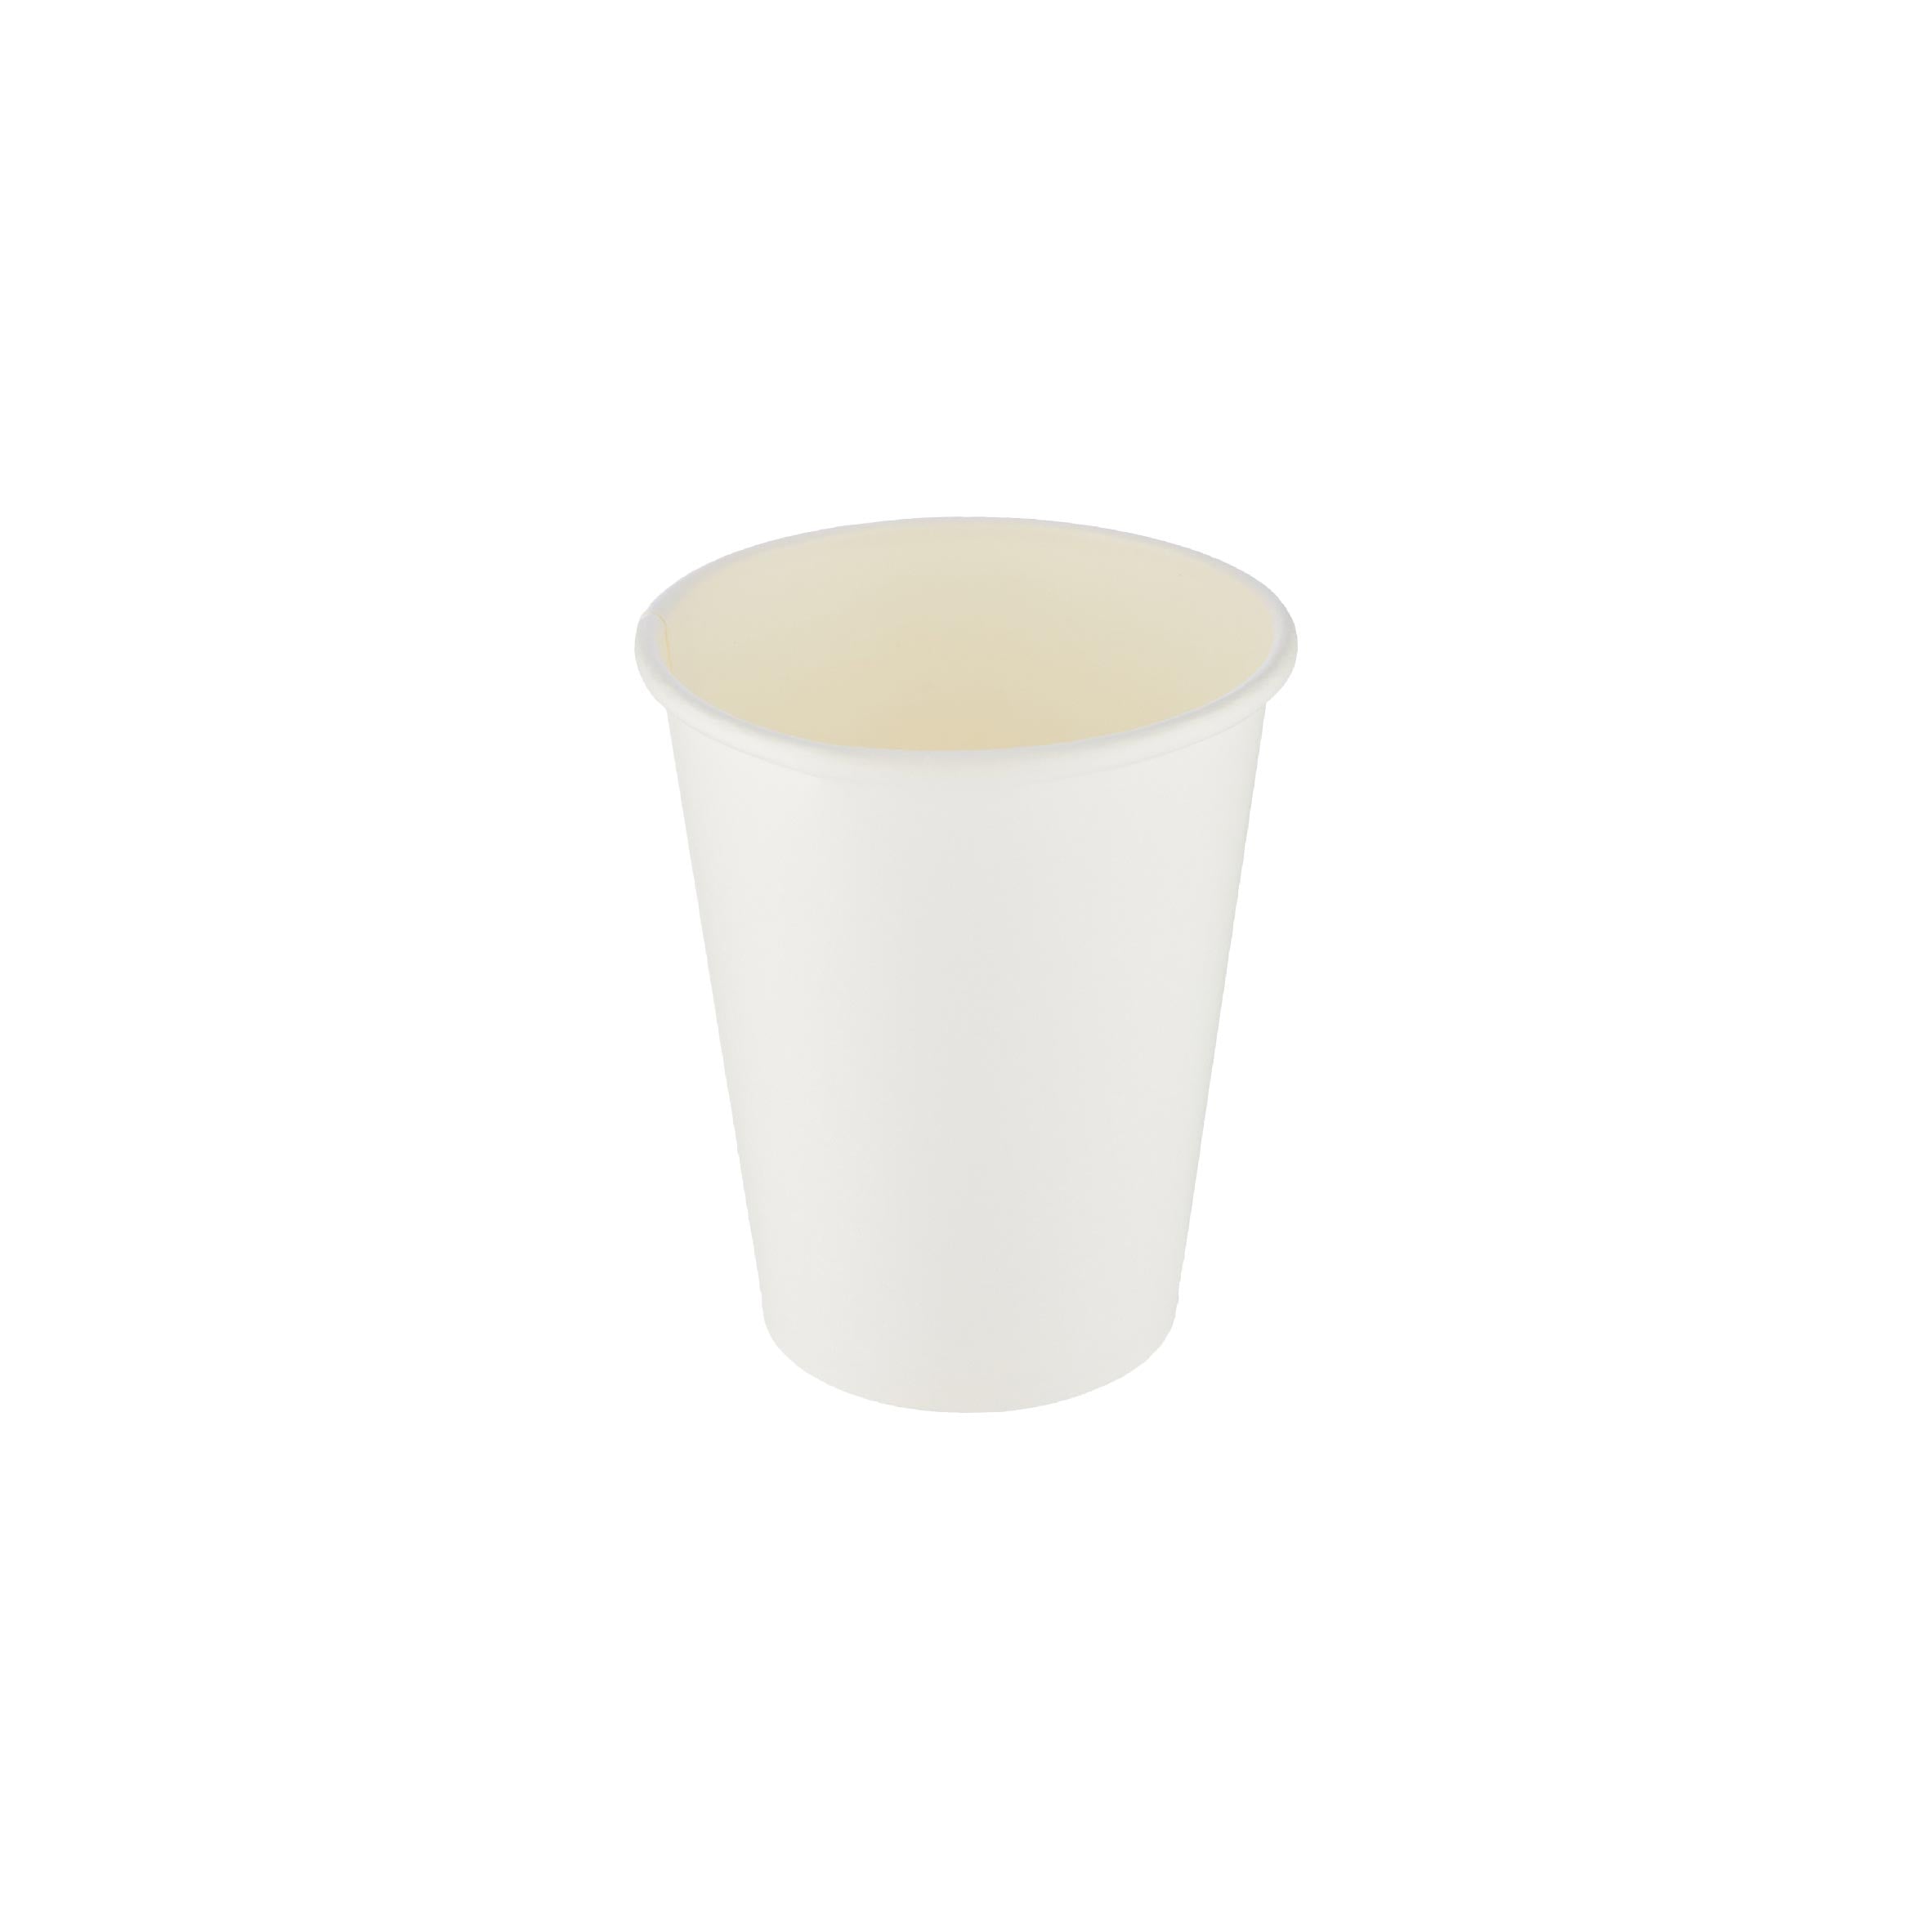 1000 Pieces 8 Oz Heavy Duty White Single Wall Paper Cups